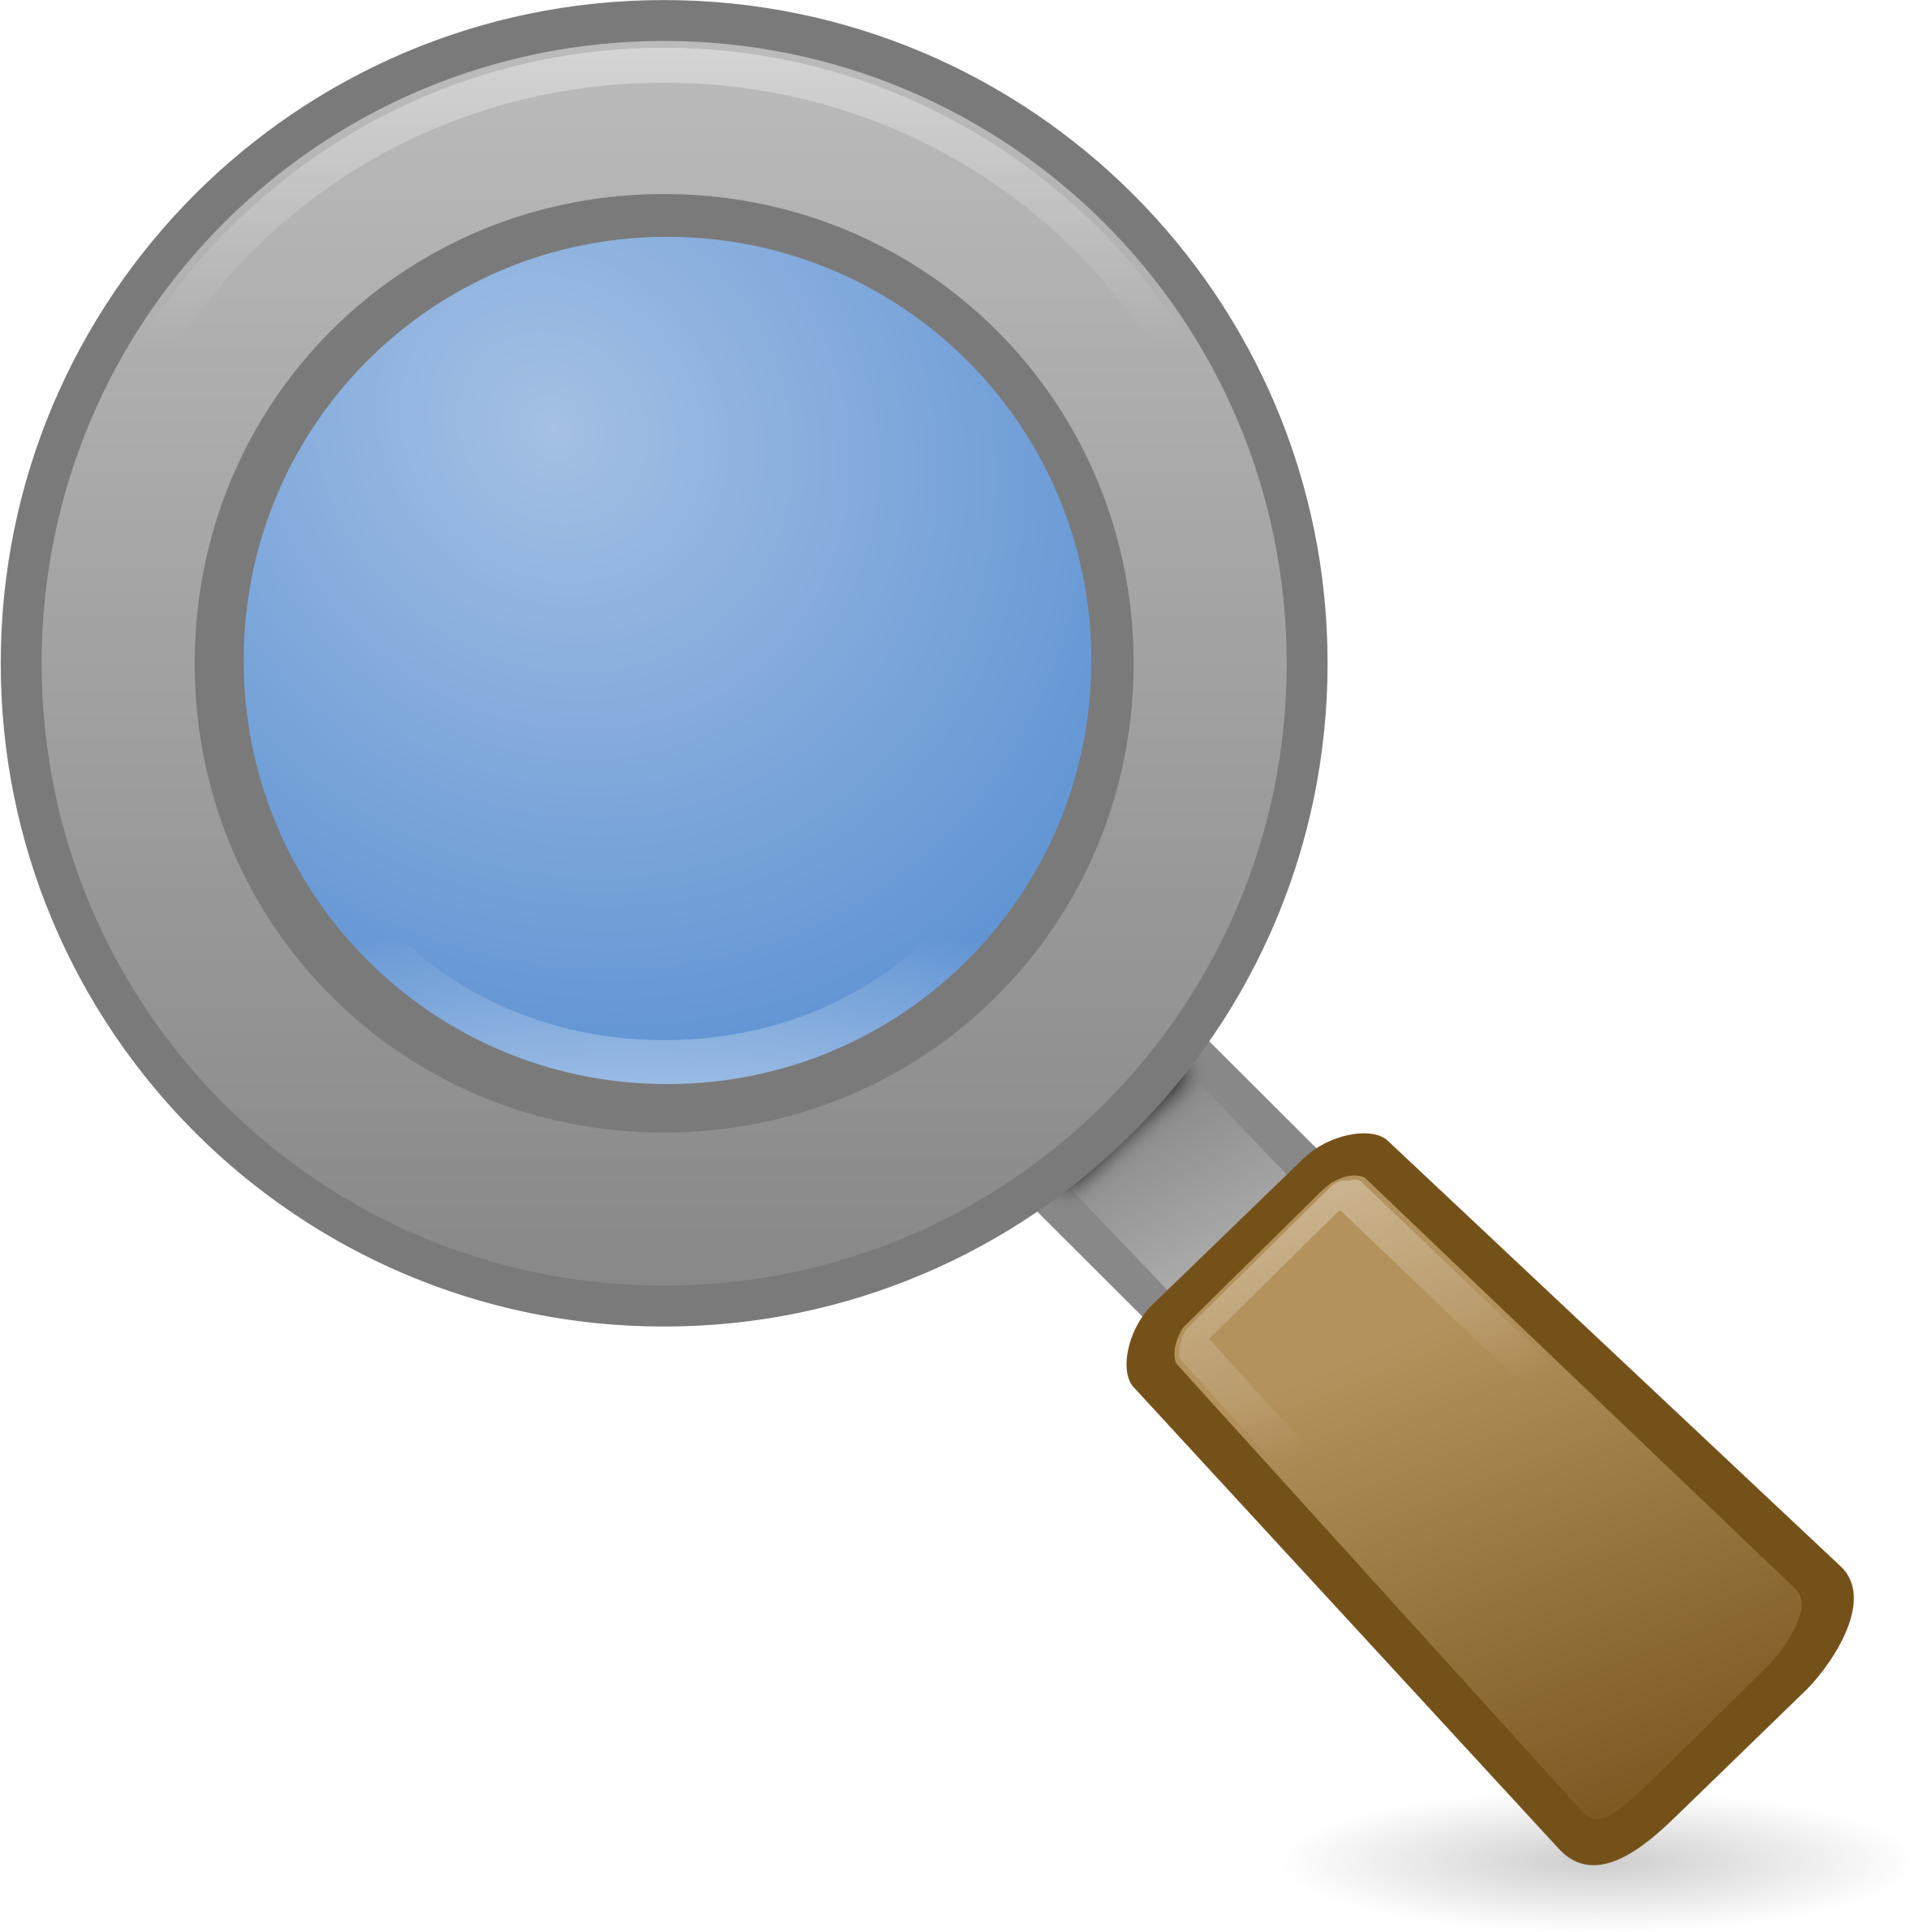 System search big image. Makeup clipart icon